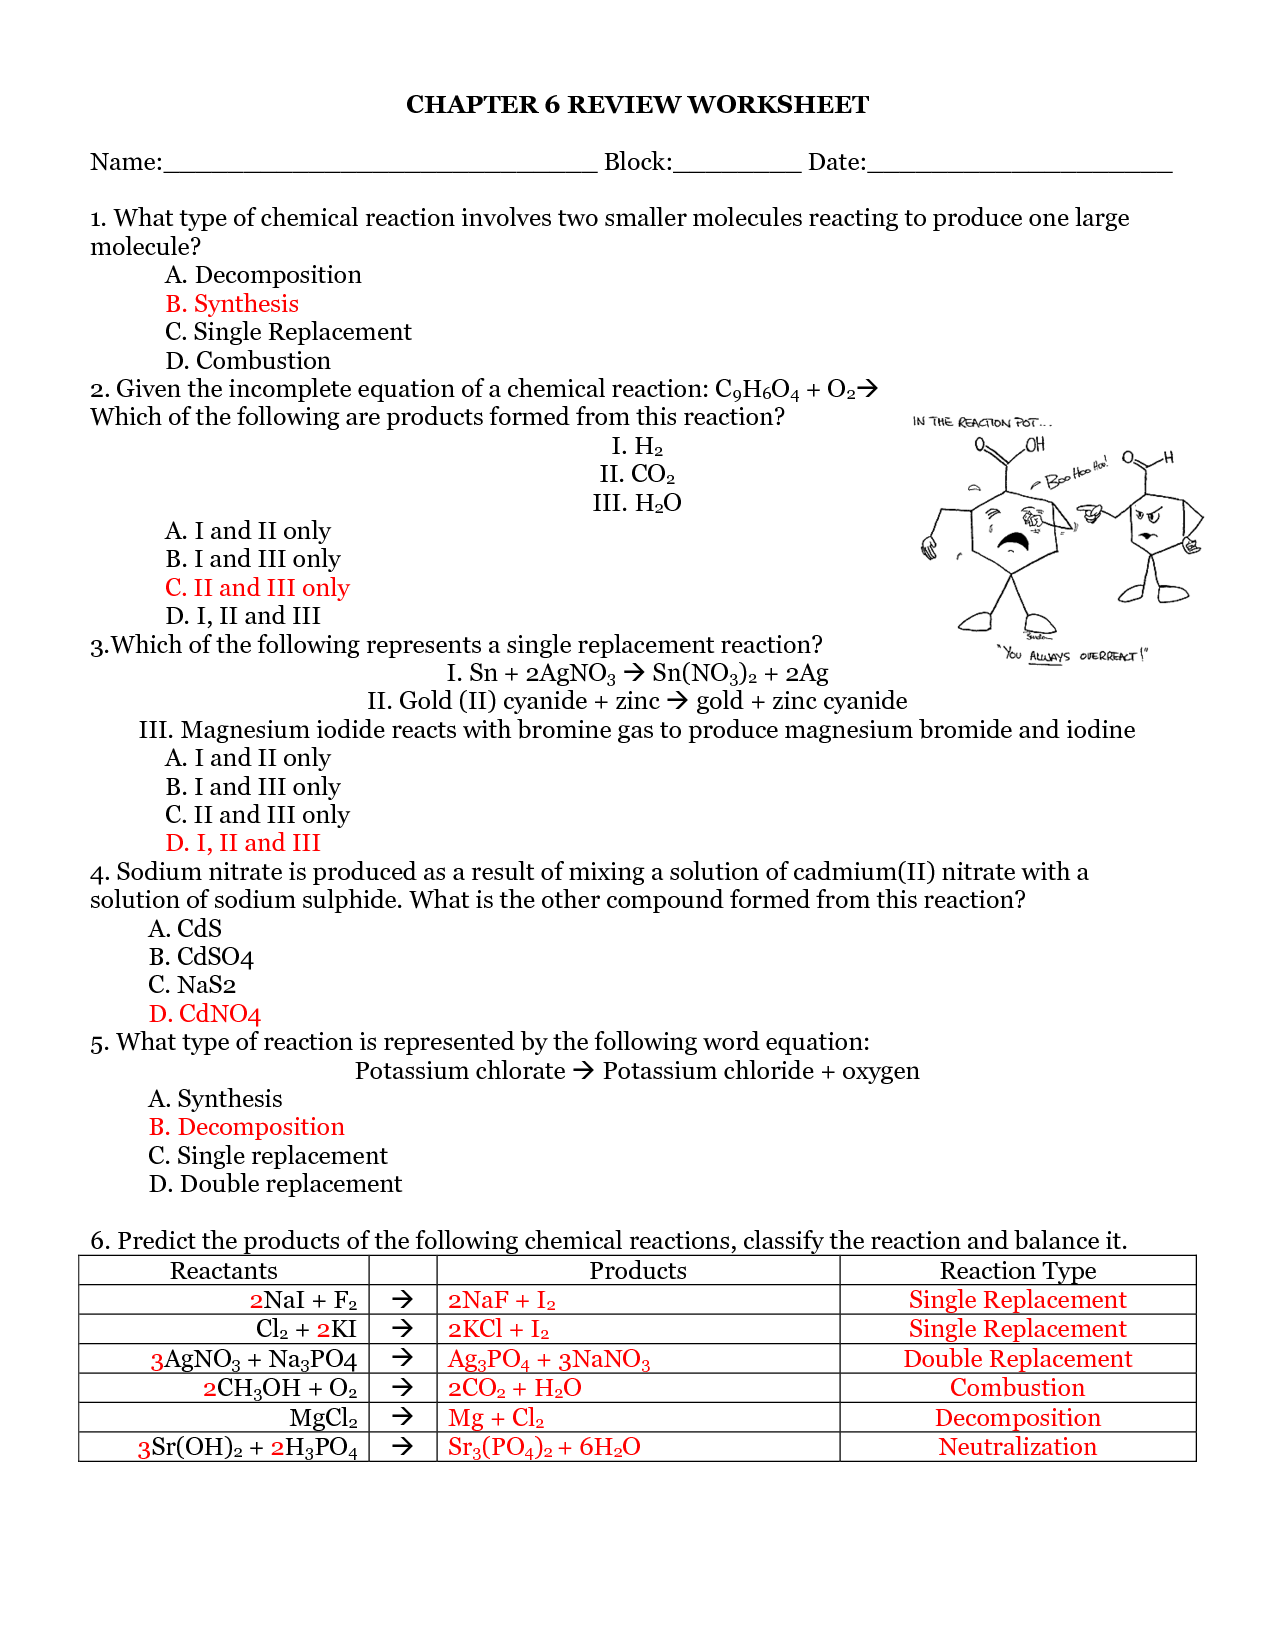 Protein Synthesis Review Worksheet Answer Key Image